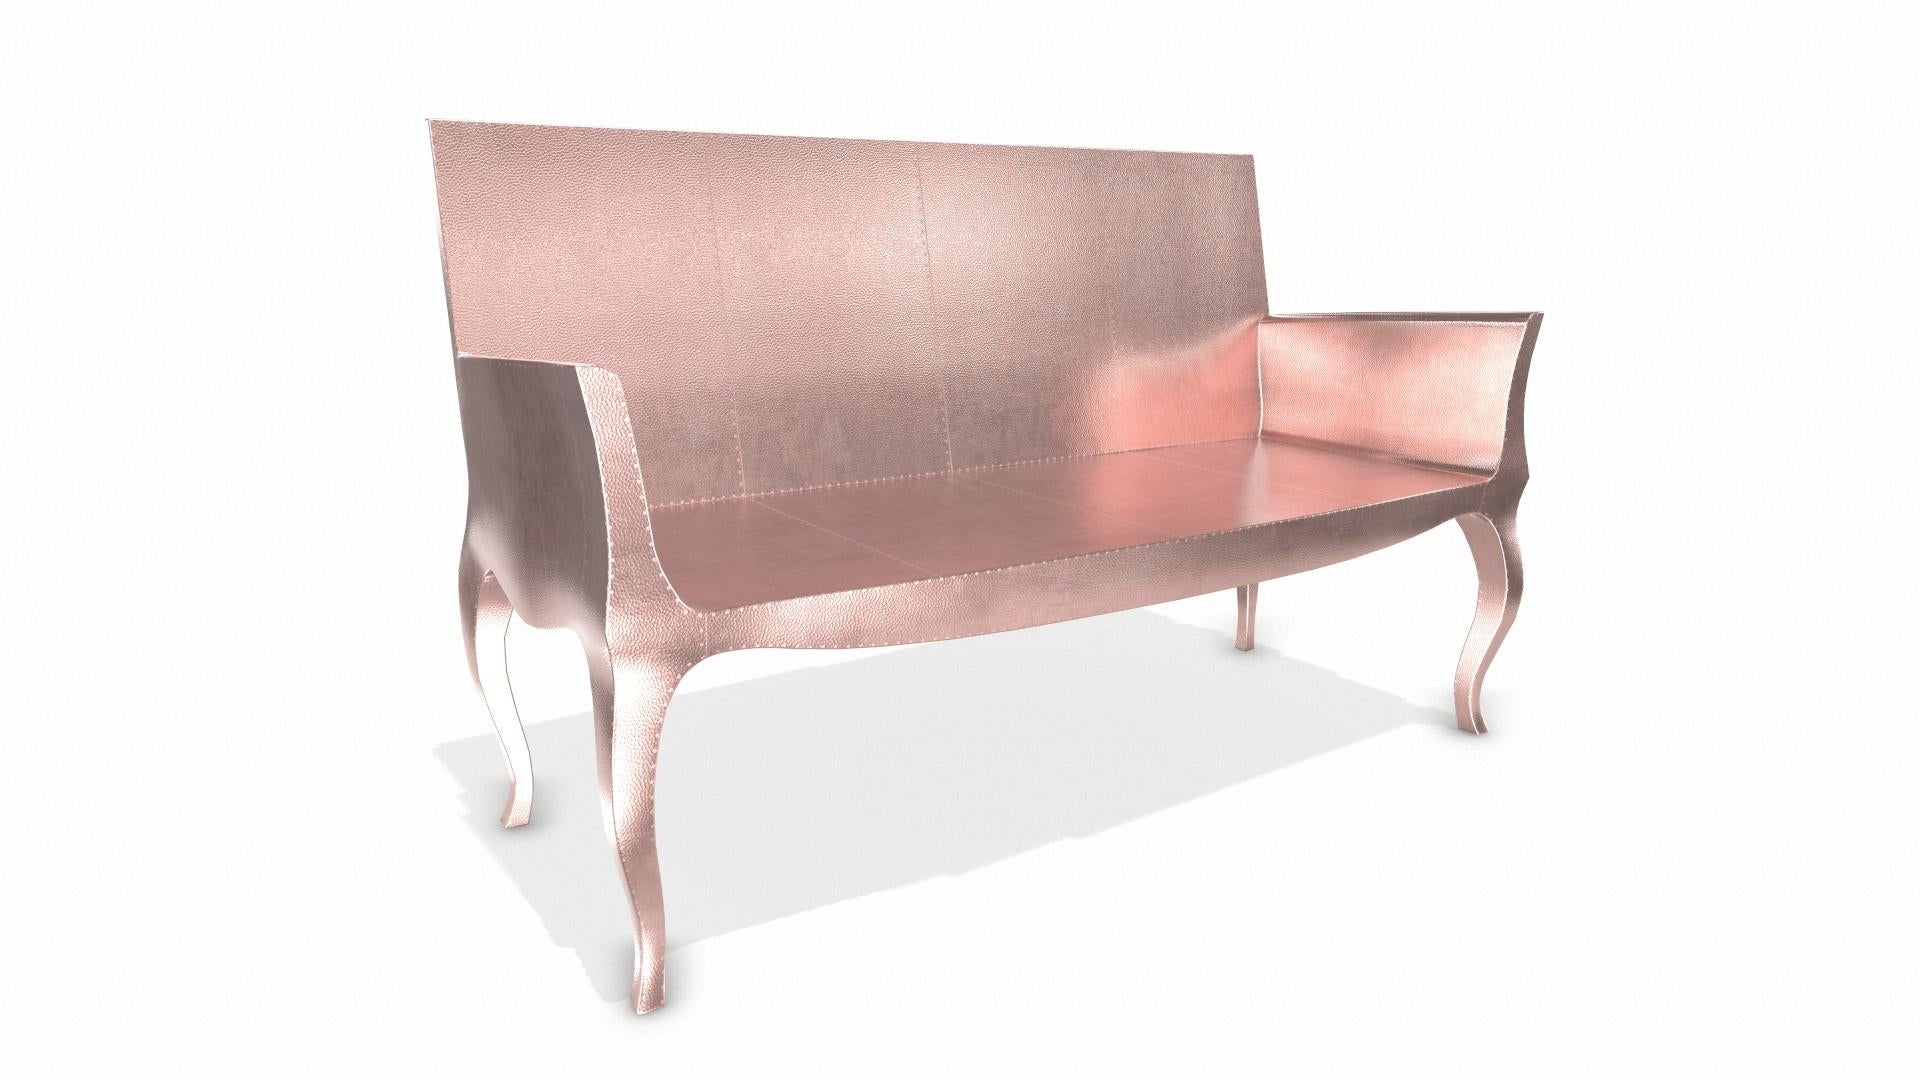 Contemporary Louise Settee Art Deco Settees in Mid. Hammered Copper by Paul Mathieu For Sale